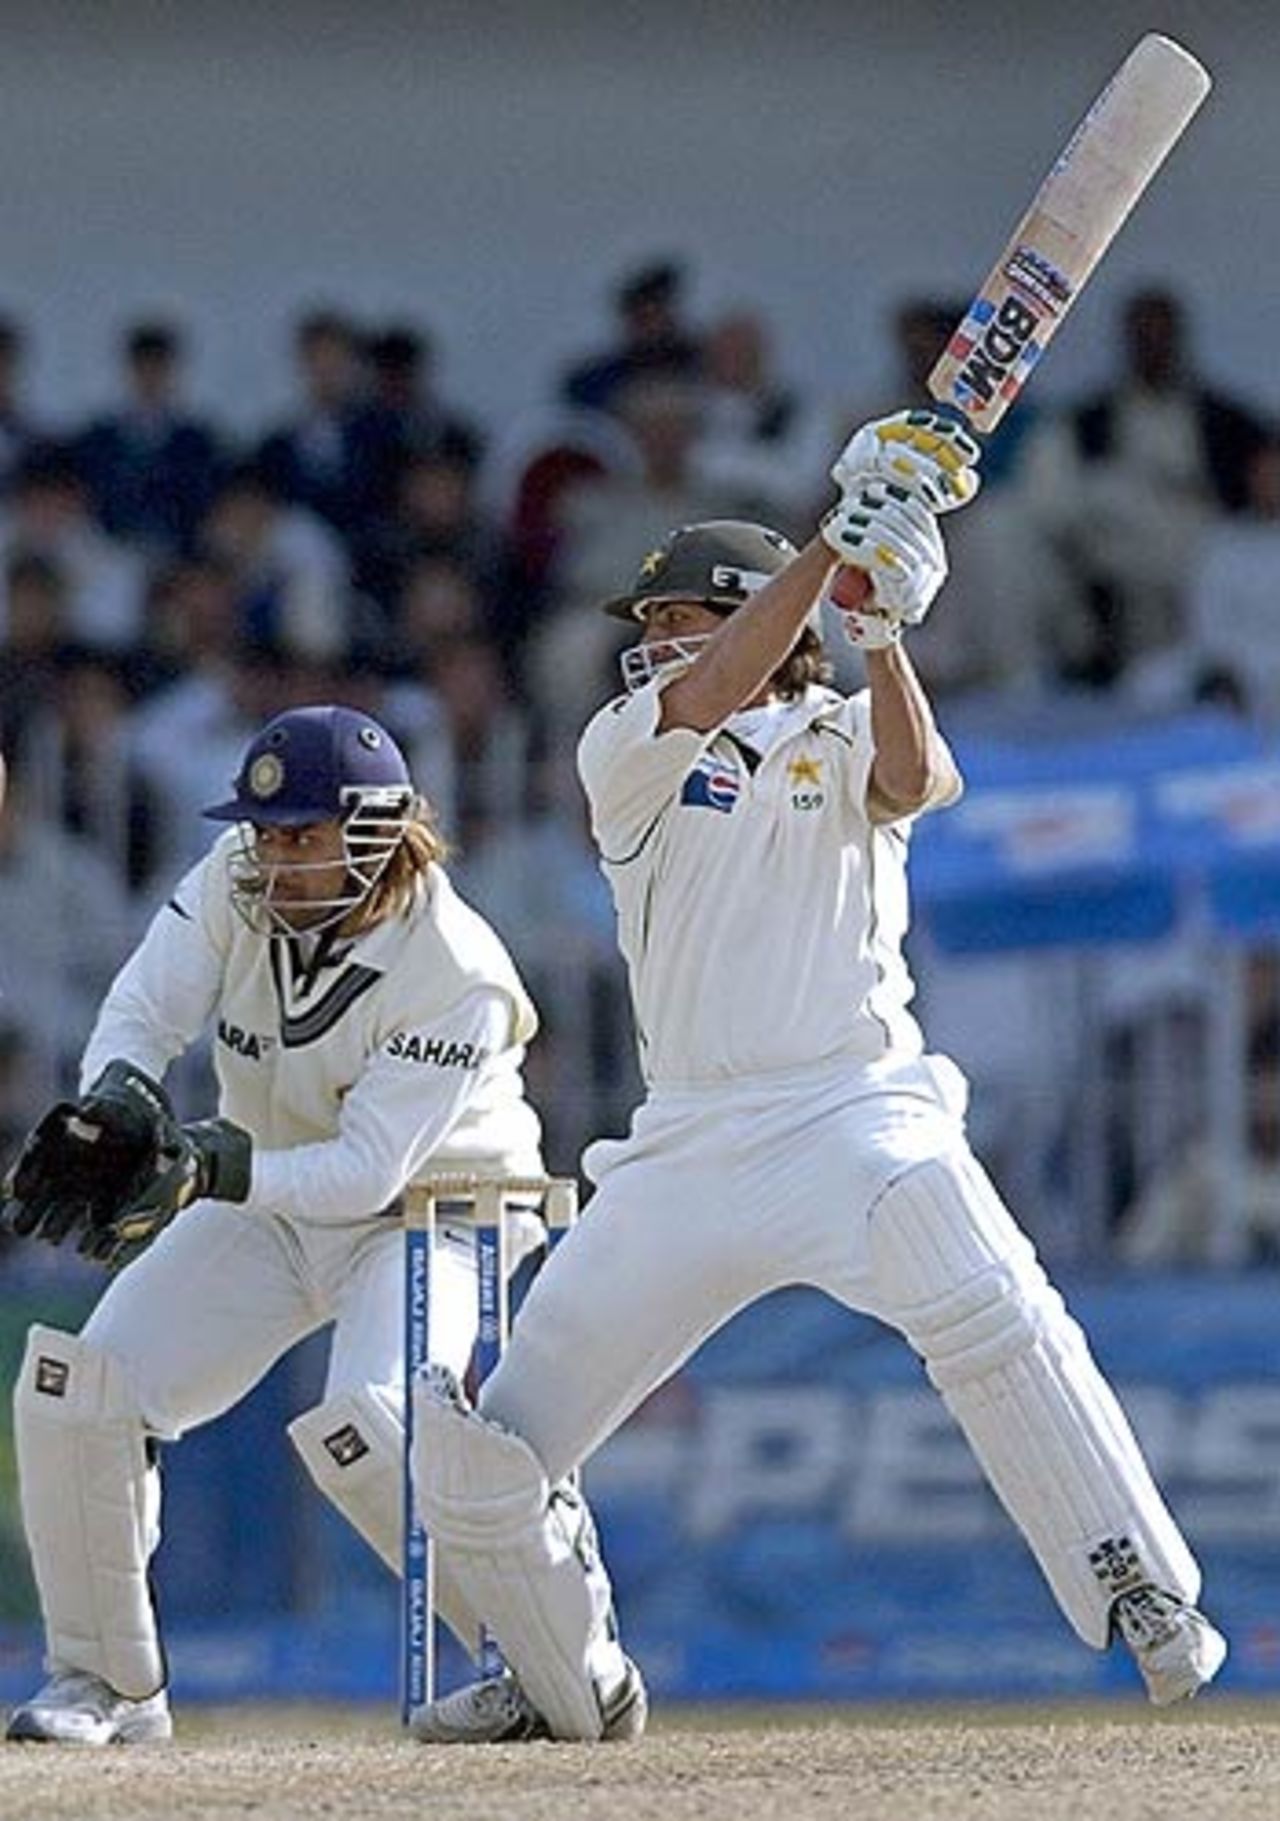 Younis Khan cuts the spinners, Pakistan v India, 2nd Test, 4th day, Faisalabad, January 24 2006